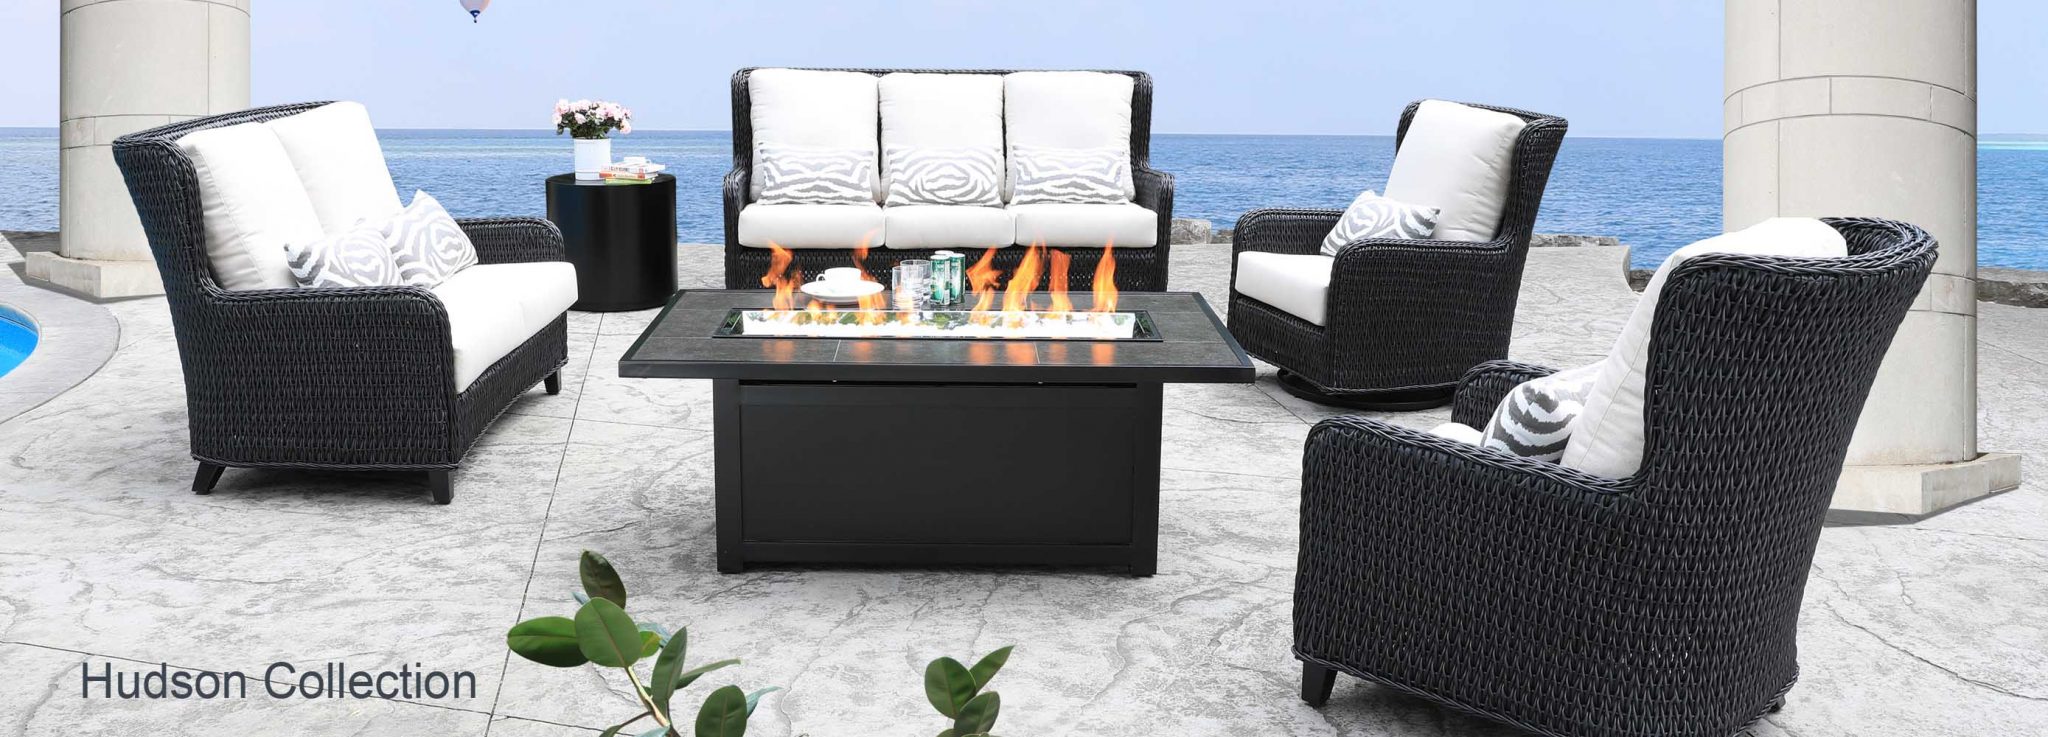 Outdoor Furniture Ing Guide, Cool Patio Furniture Canada